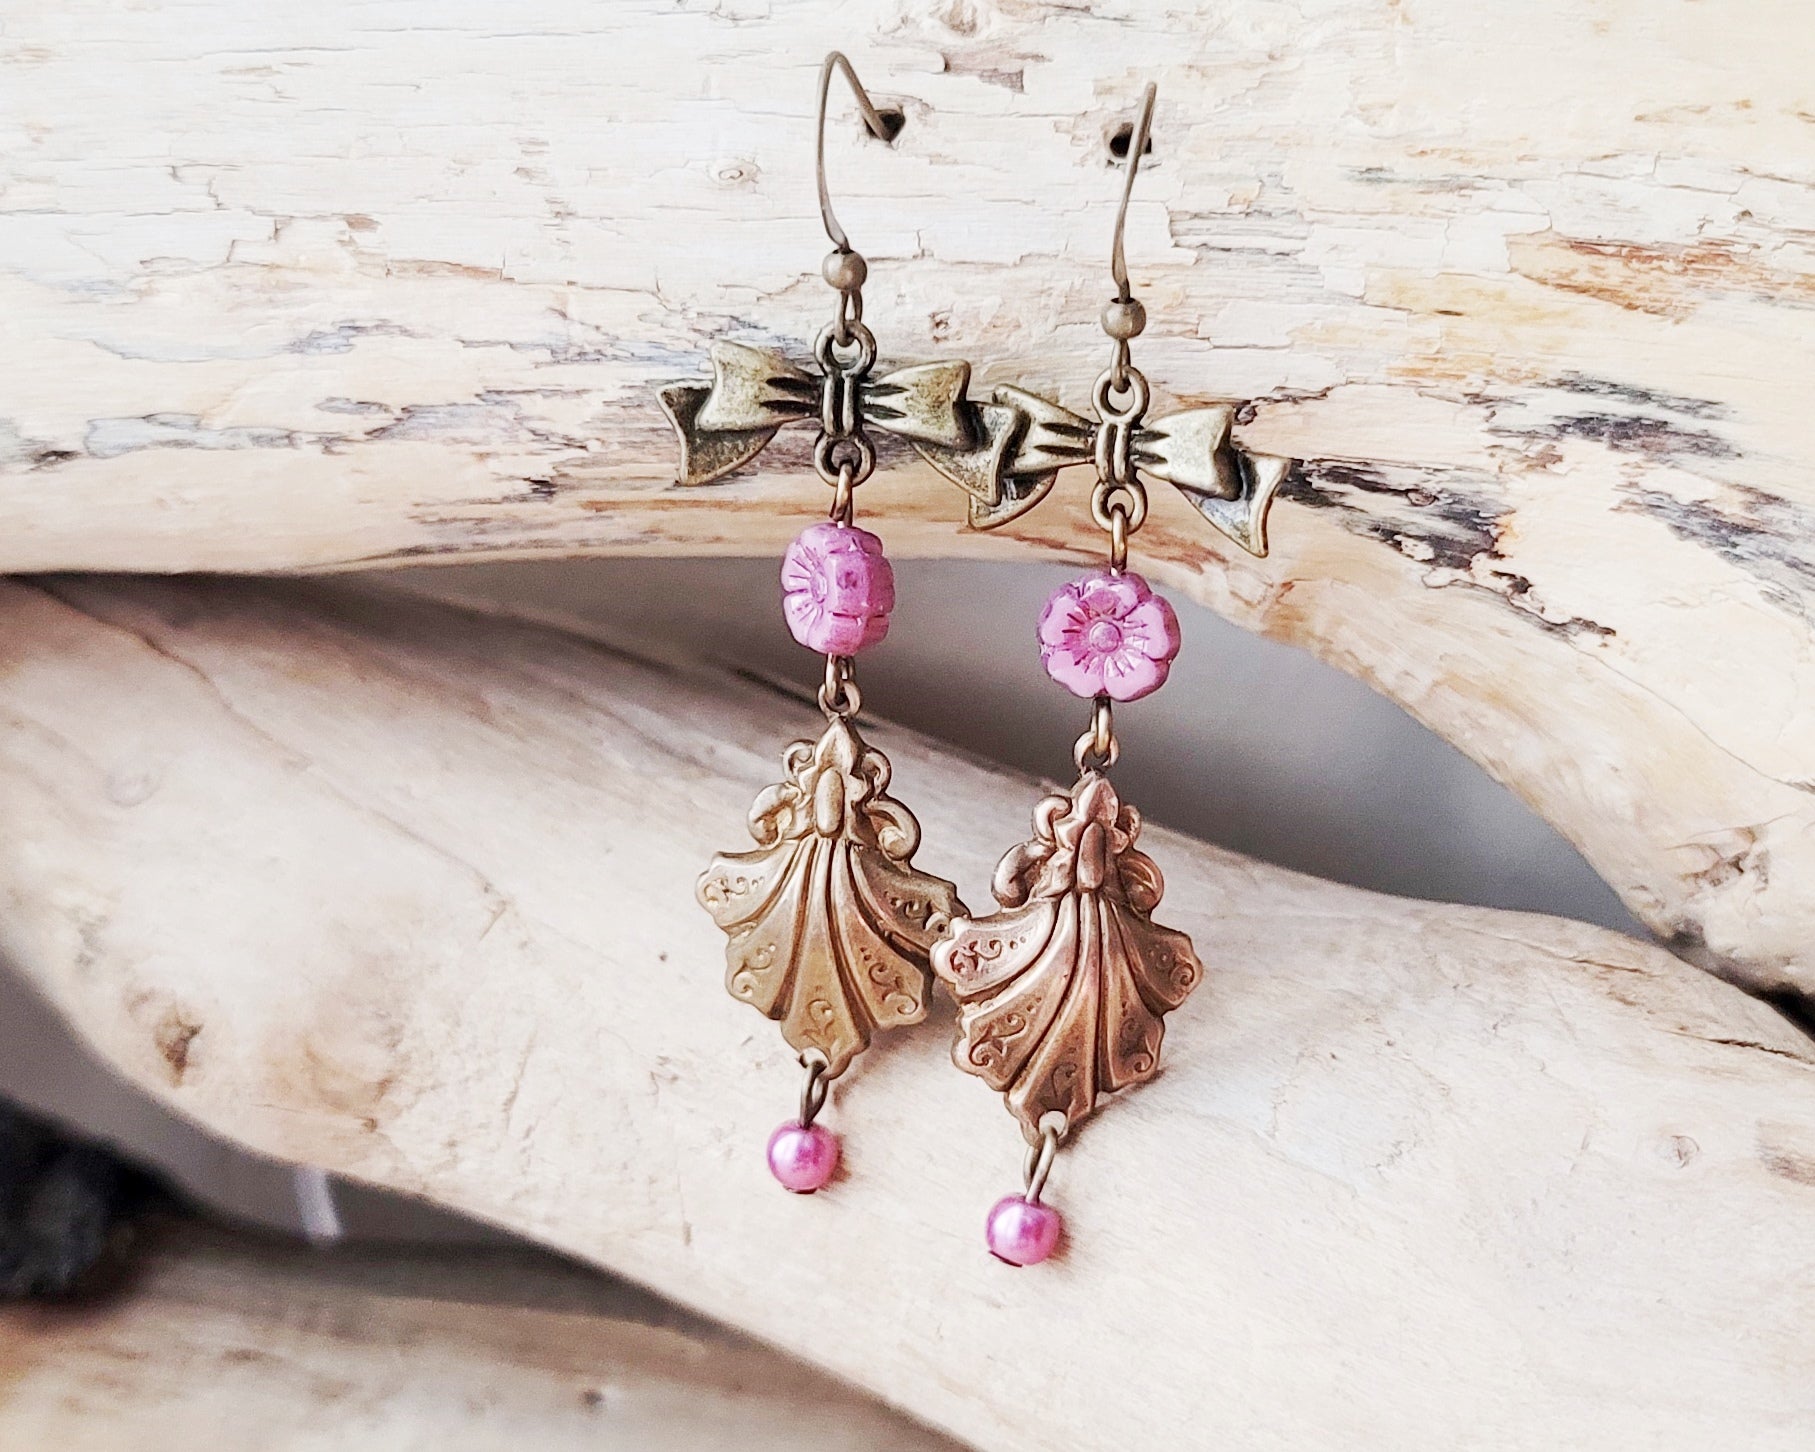 Vintage Romance Flower Shell Bow Earrings made with Upcycled Vintage Shells, Pink Flowers and Bows. Displayed on beach wood